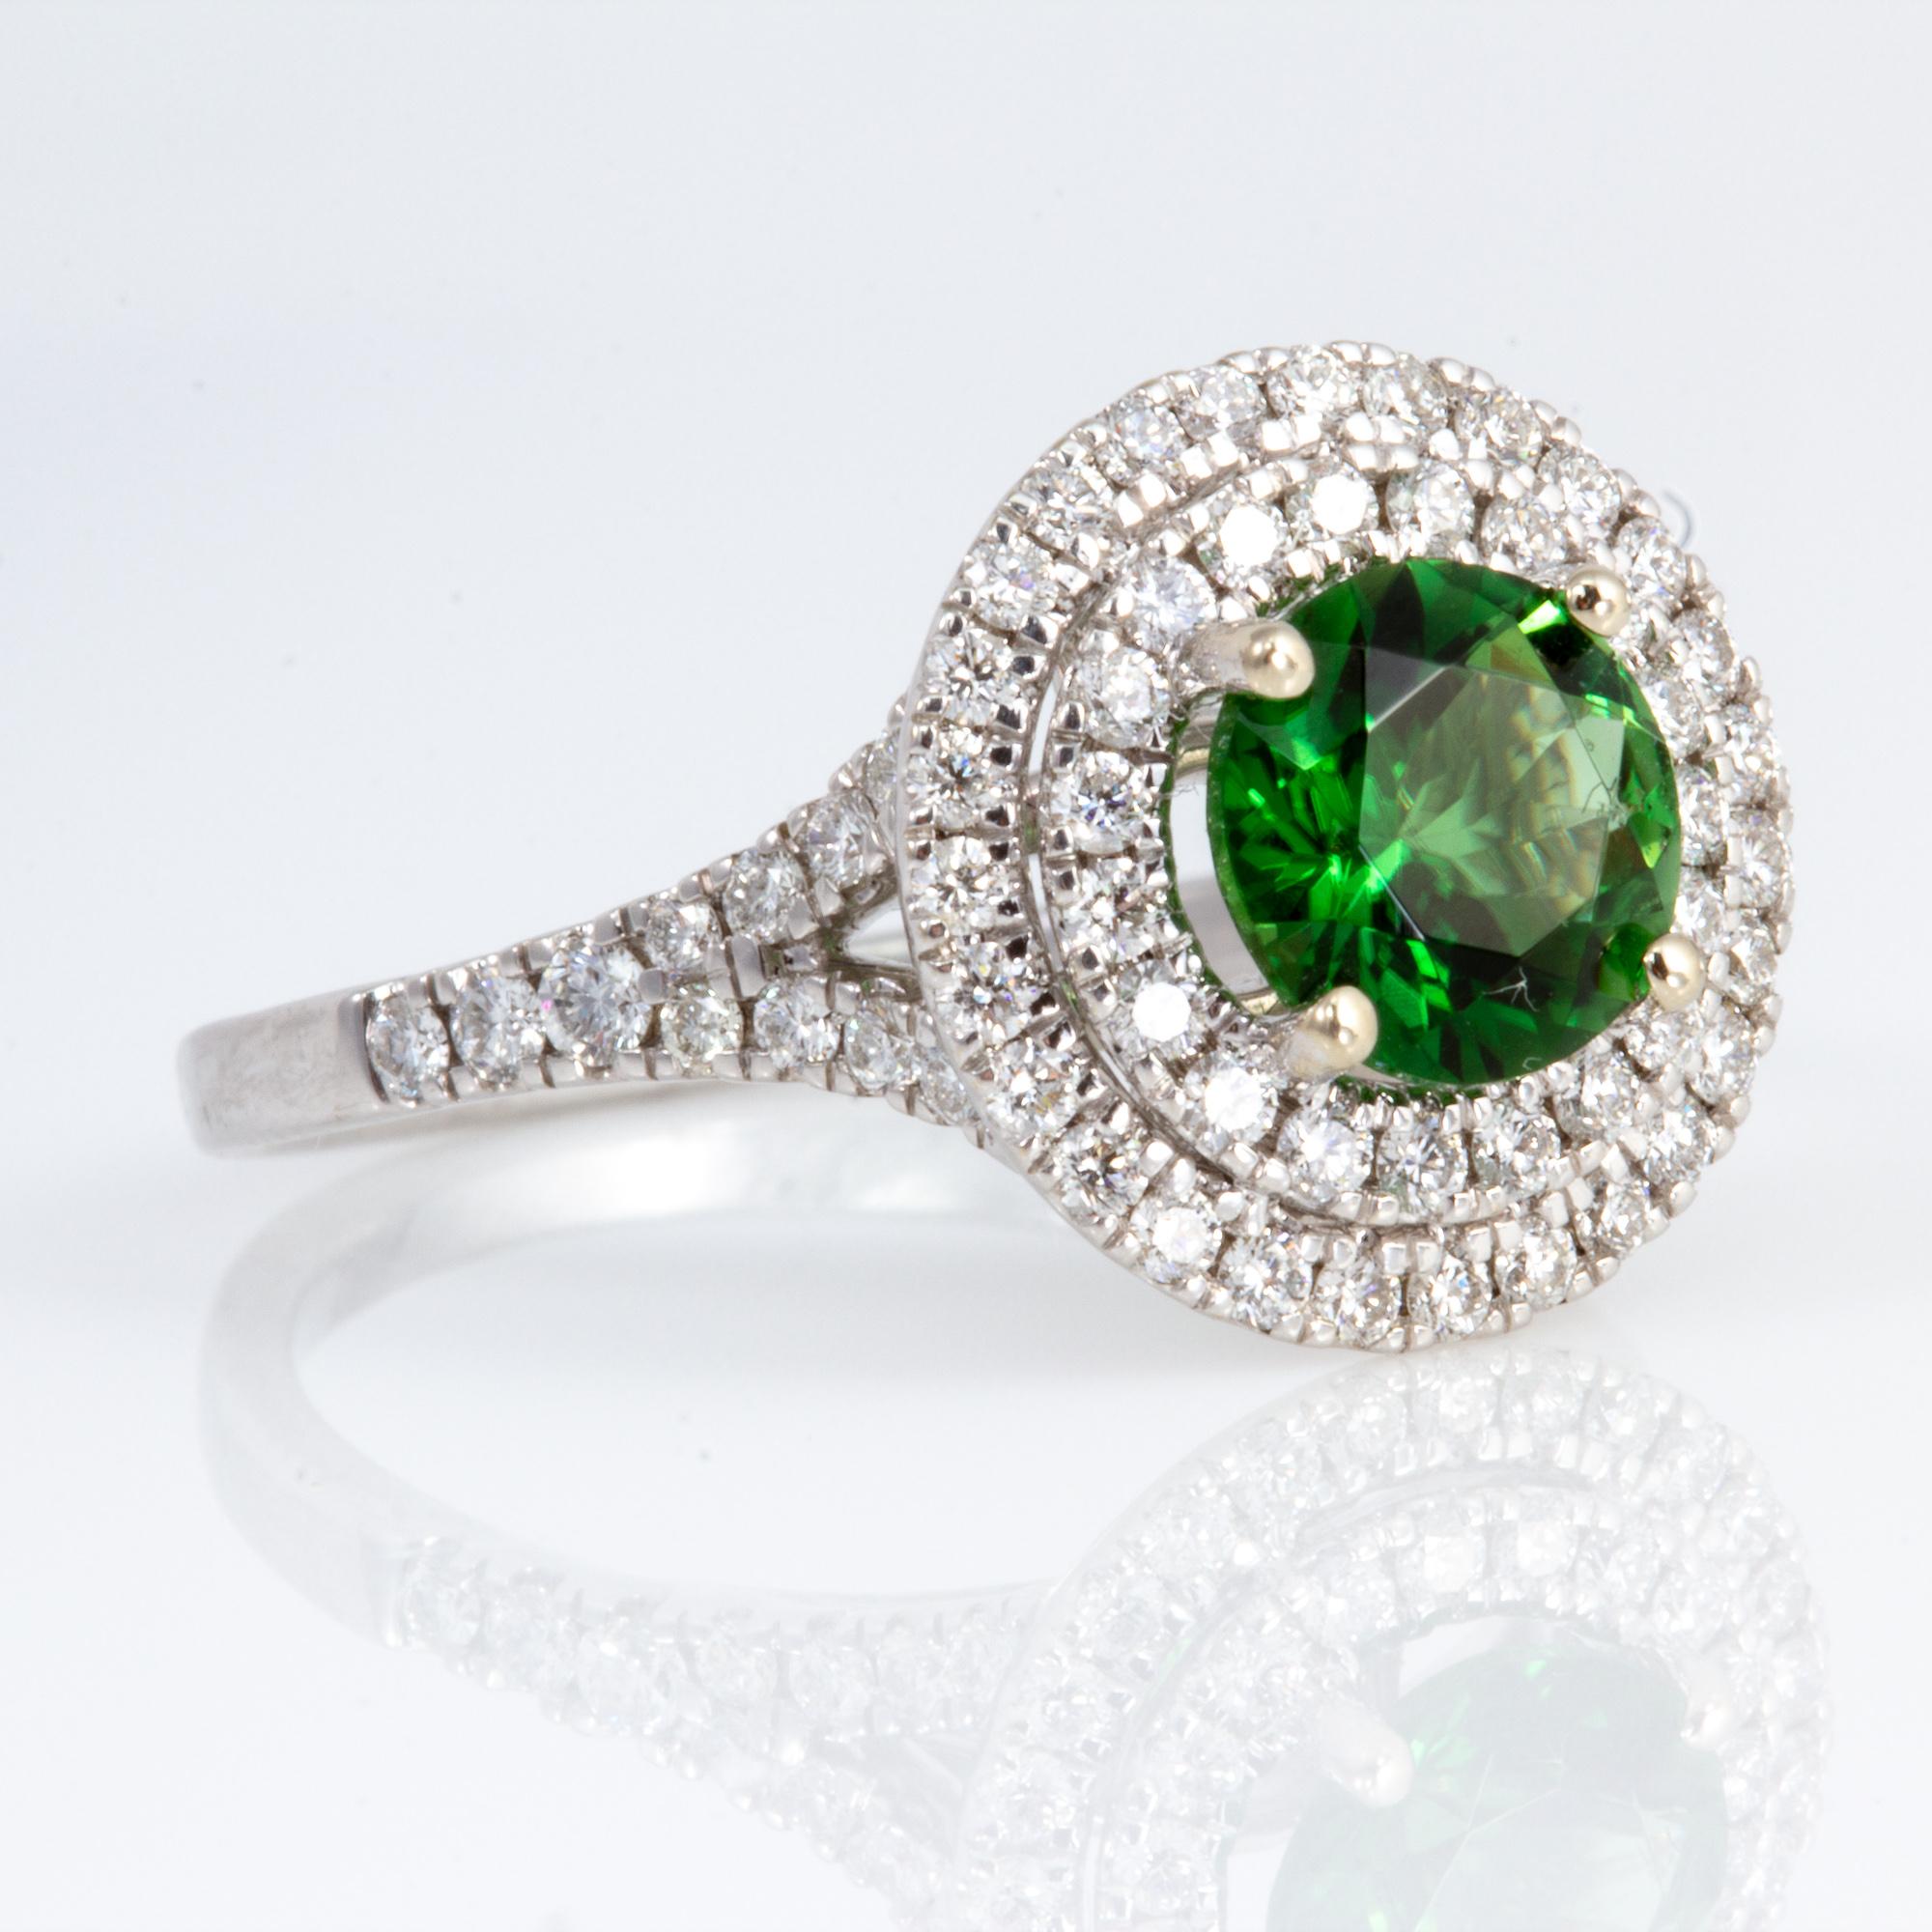 Exceptionally Well Cut 1.26 Carat Chrome Tourmaline and Diamond Ring 9